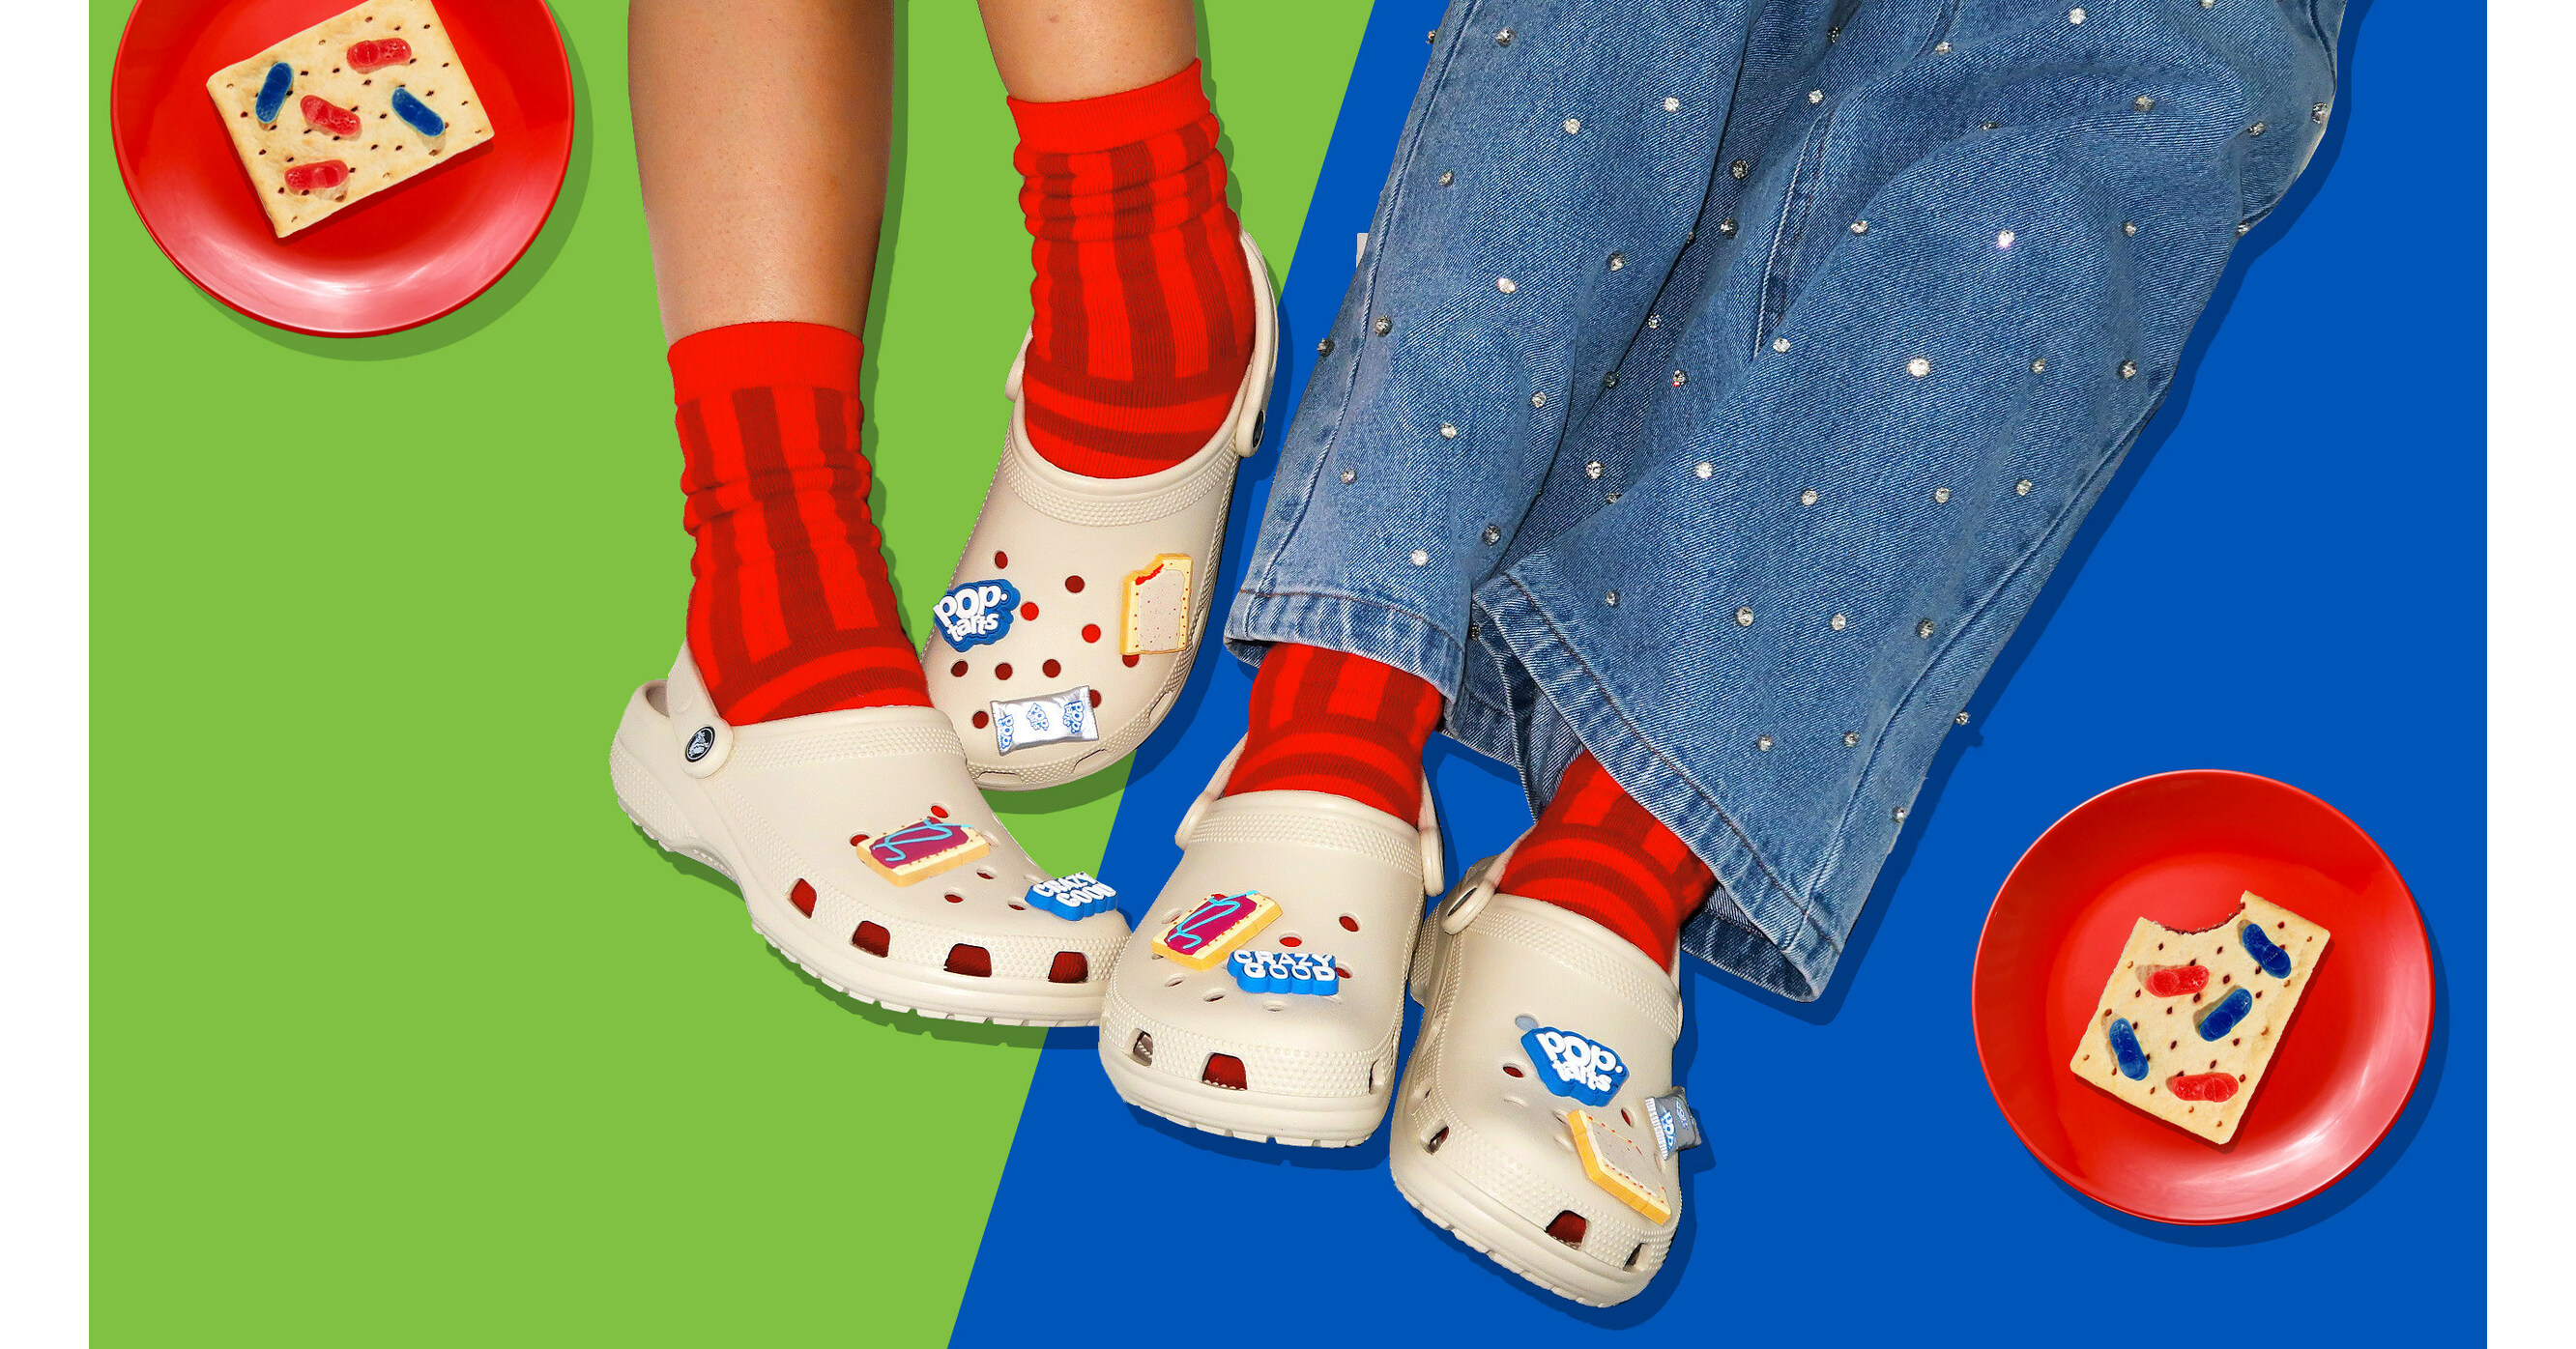 POP-TARTS® AND CROCS LAUNCH LIMITED-EDITION 'CROC-TARTS' COLLAB FEATURING  FIRST-EVER CANDY JIBBITZ™ CHARMS